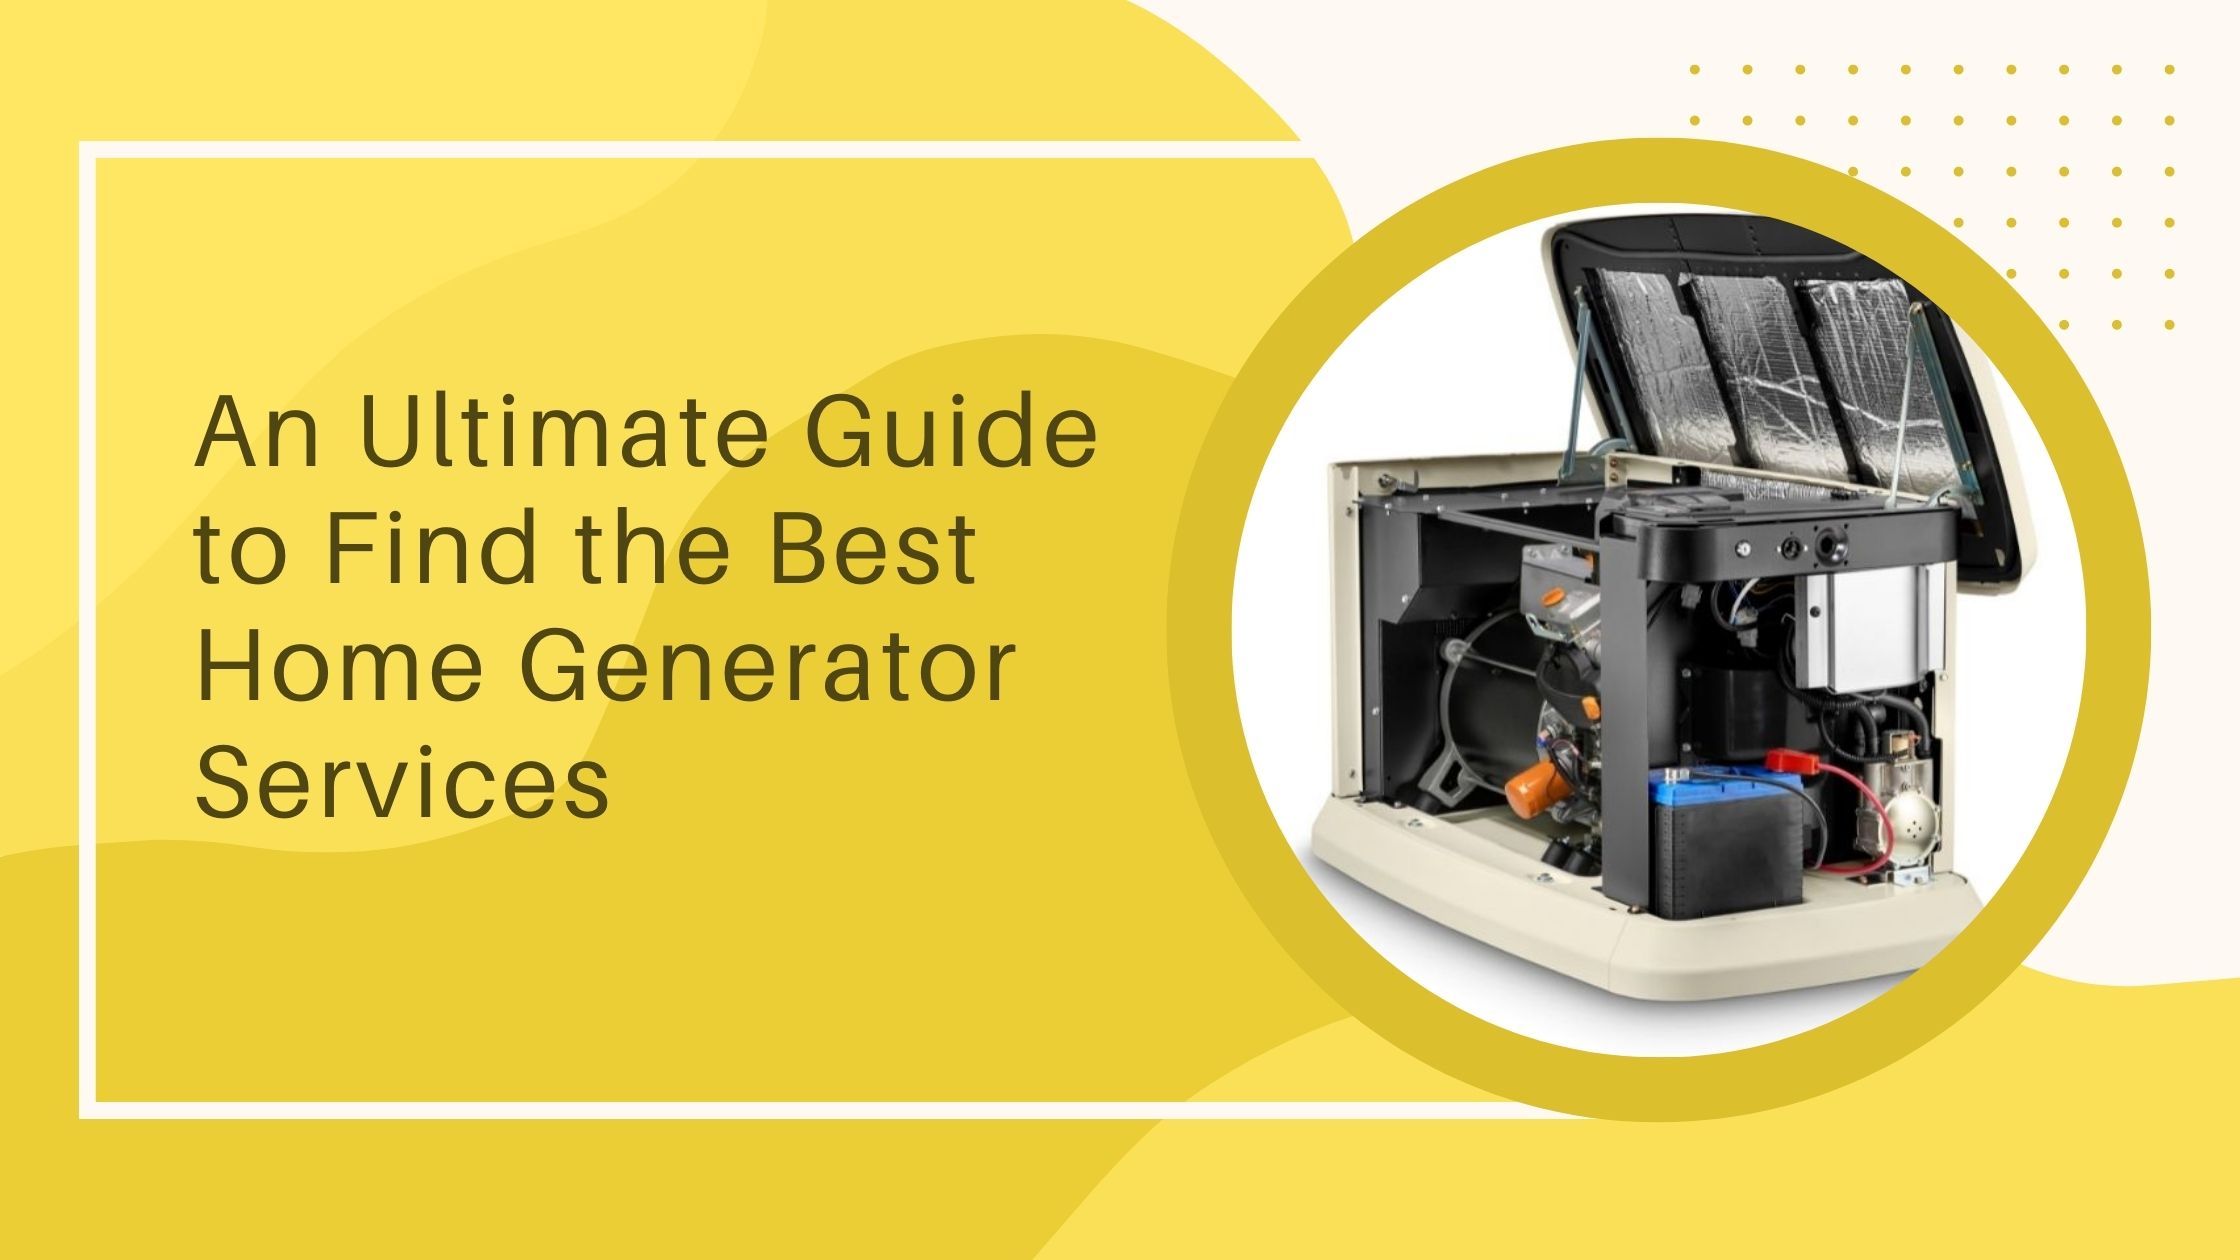 An Ultimate Guide to Find the Best Home Generator Services